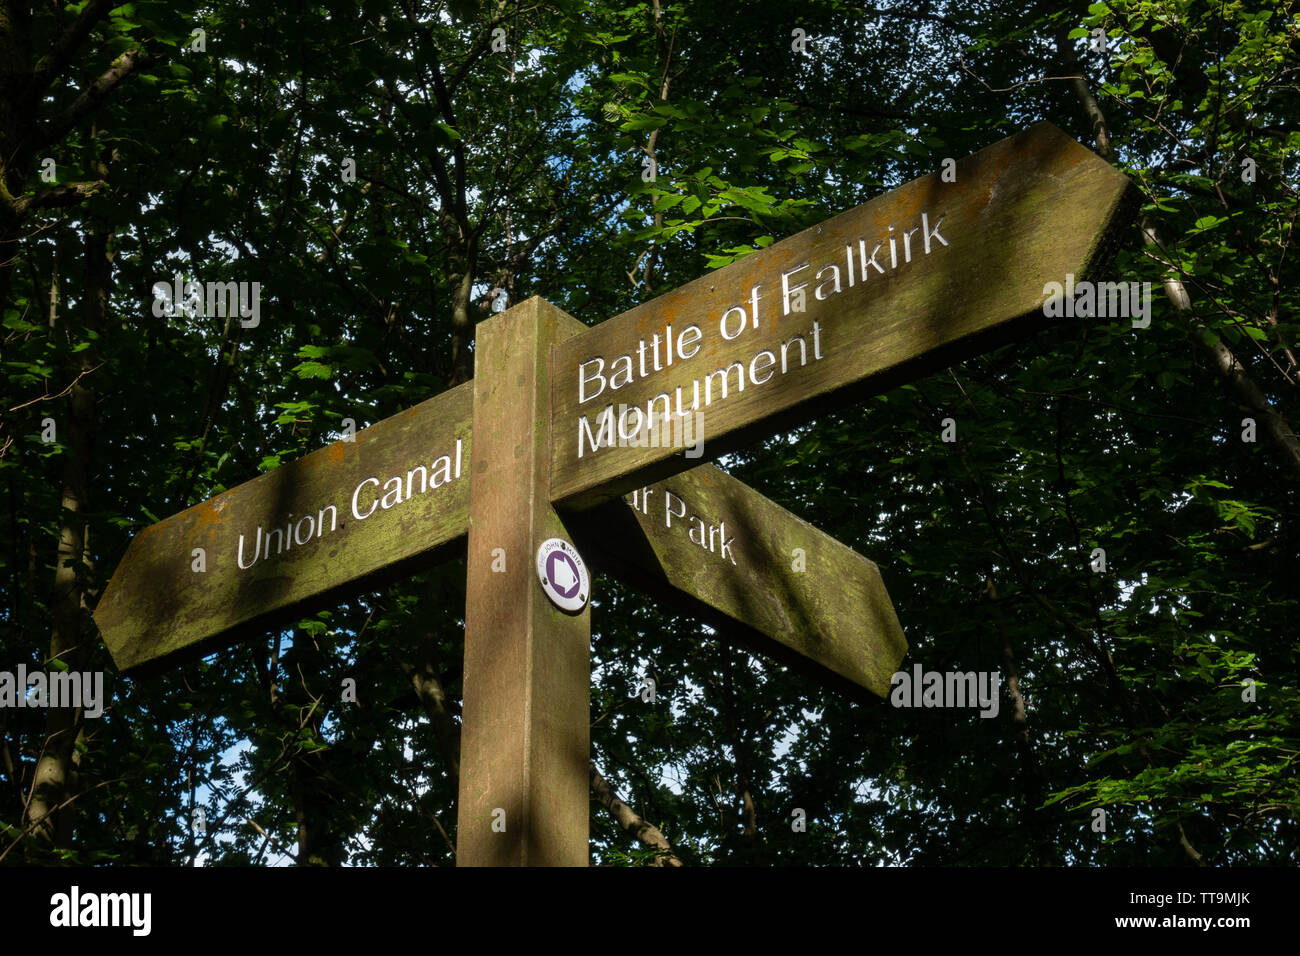 Battle of Falkirk Monument and Union Canal signpost on The John Muir Way long distance footpath, Falkirk, Scotland, UK Stock Photo